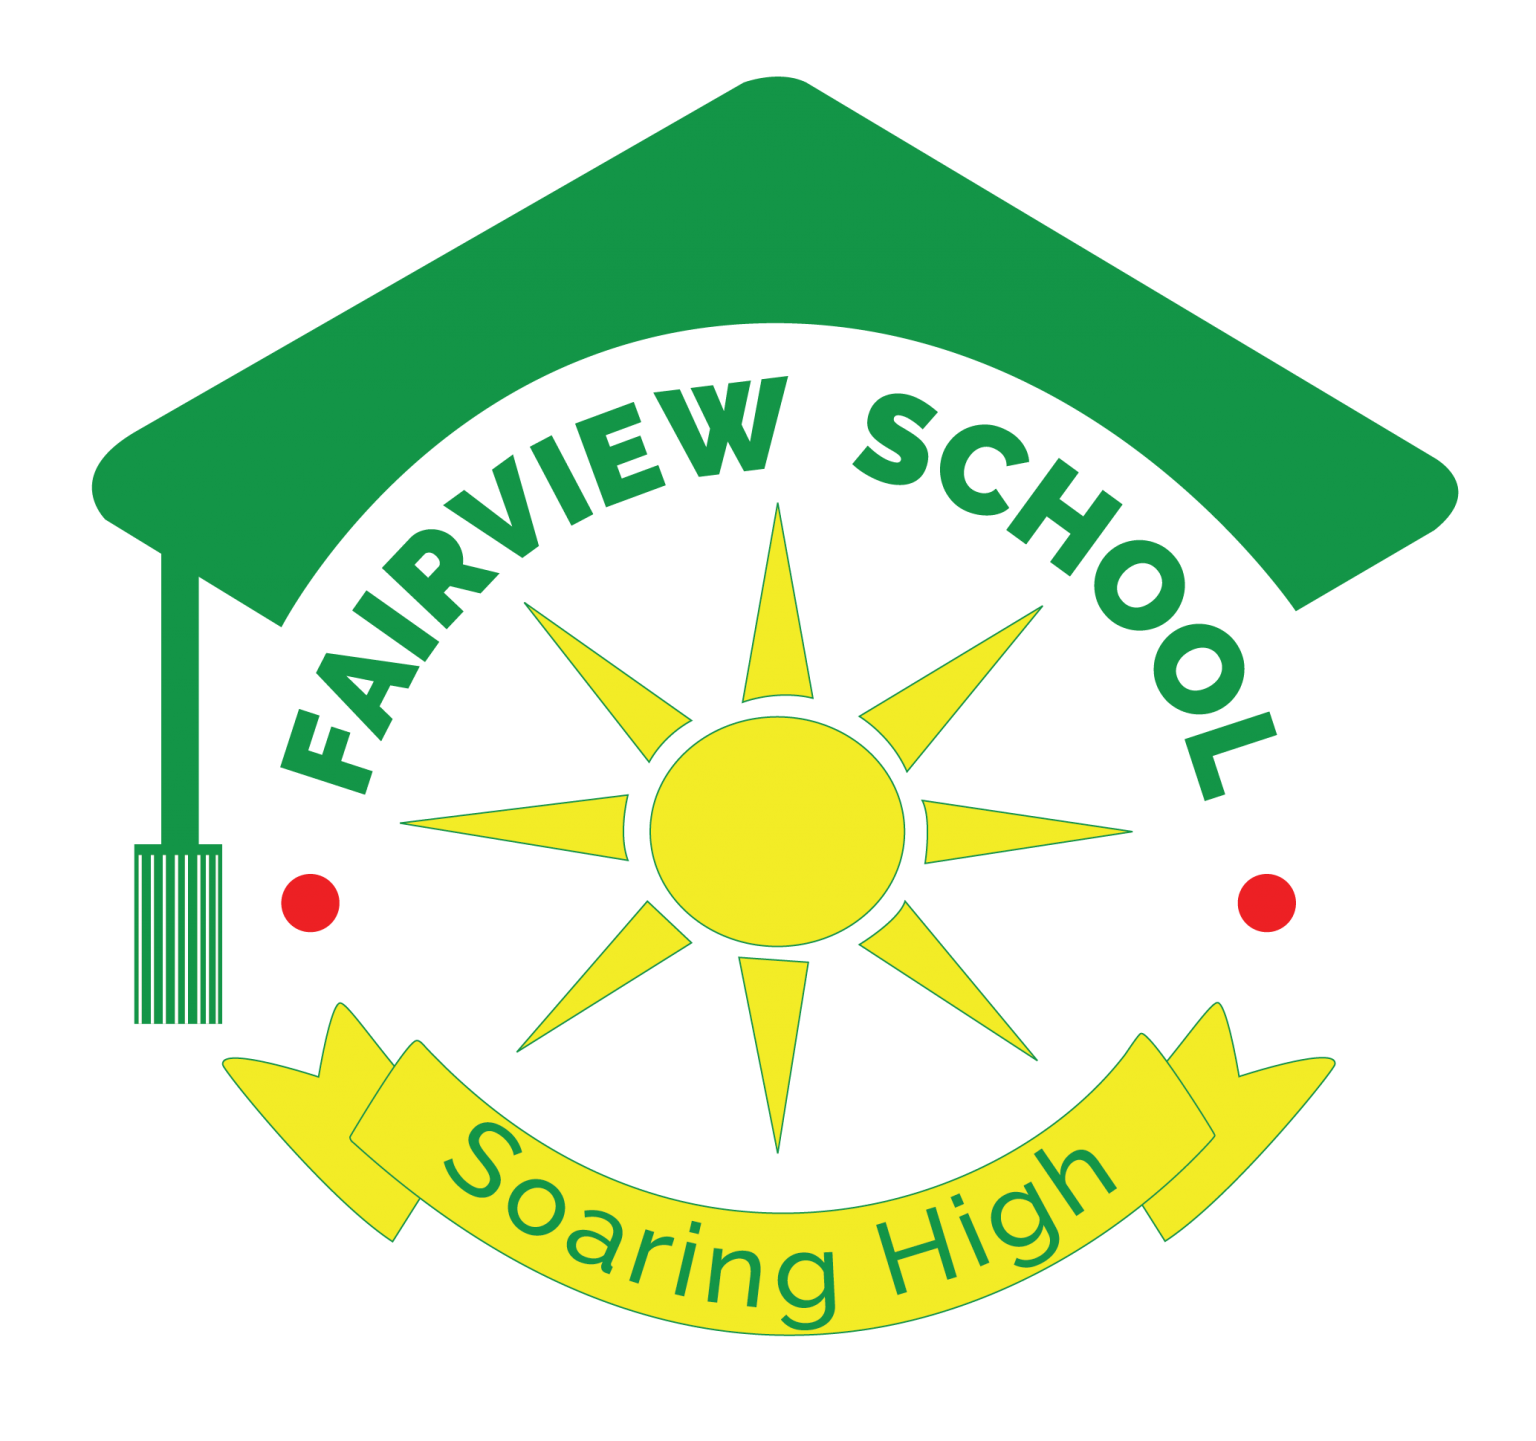 Fairview Secondary School Soaring High